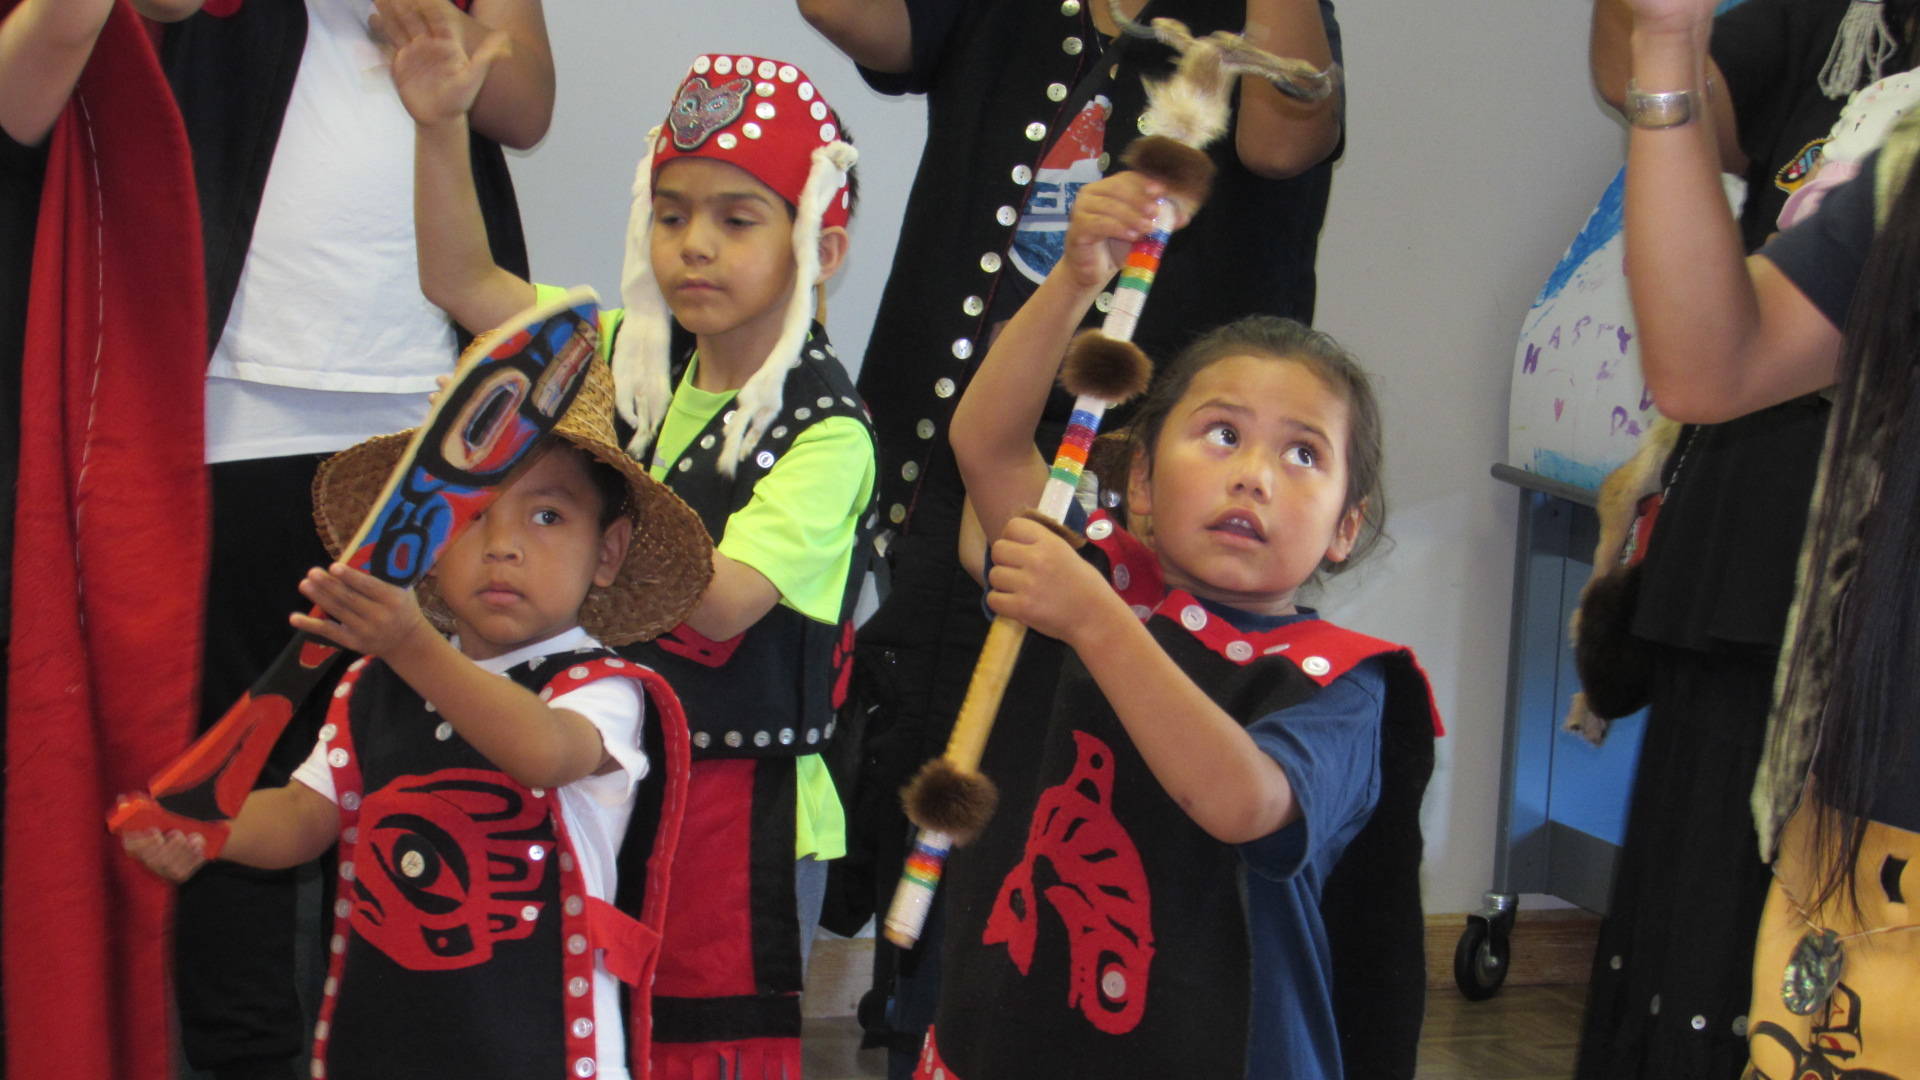 Martin “Junior” Stepetin Jr., Evan Elton and Shaunde Ahshapanek, young members of the Woosh.ji.een Dance Group dance during a Native Culture Festival Saturday at Douglas Public Library. Older members of the group explained the significance of their regalia to a crowd gathered at the library for the festival. (Ben Hohenstatt | Capital City Weekly)